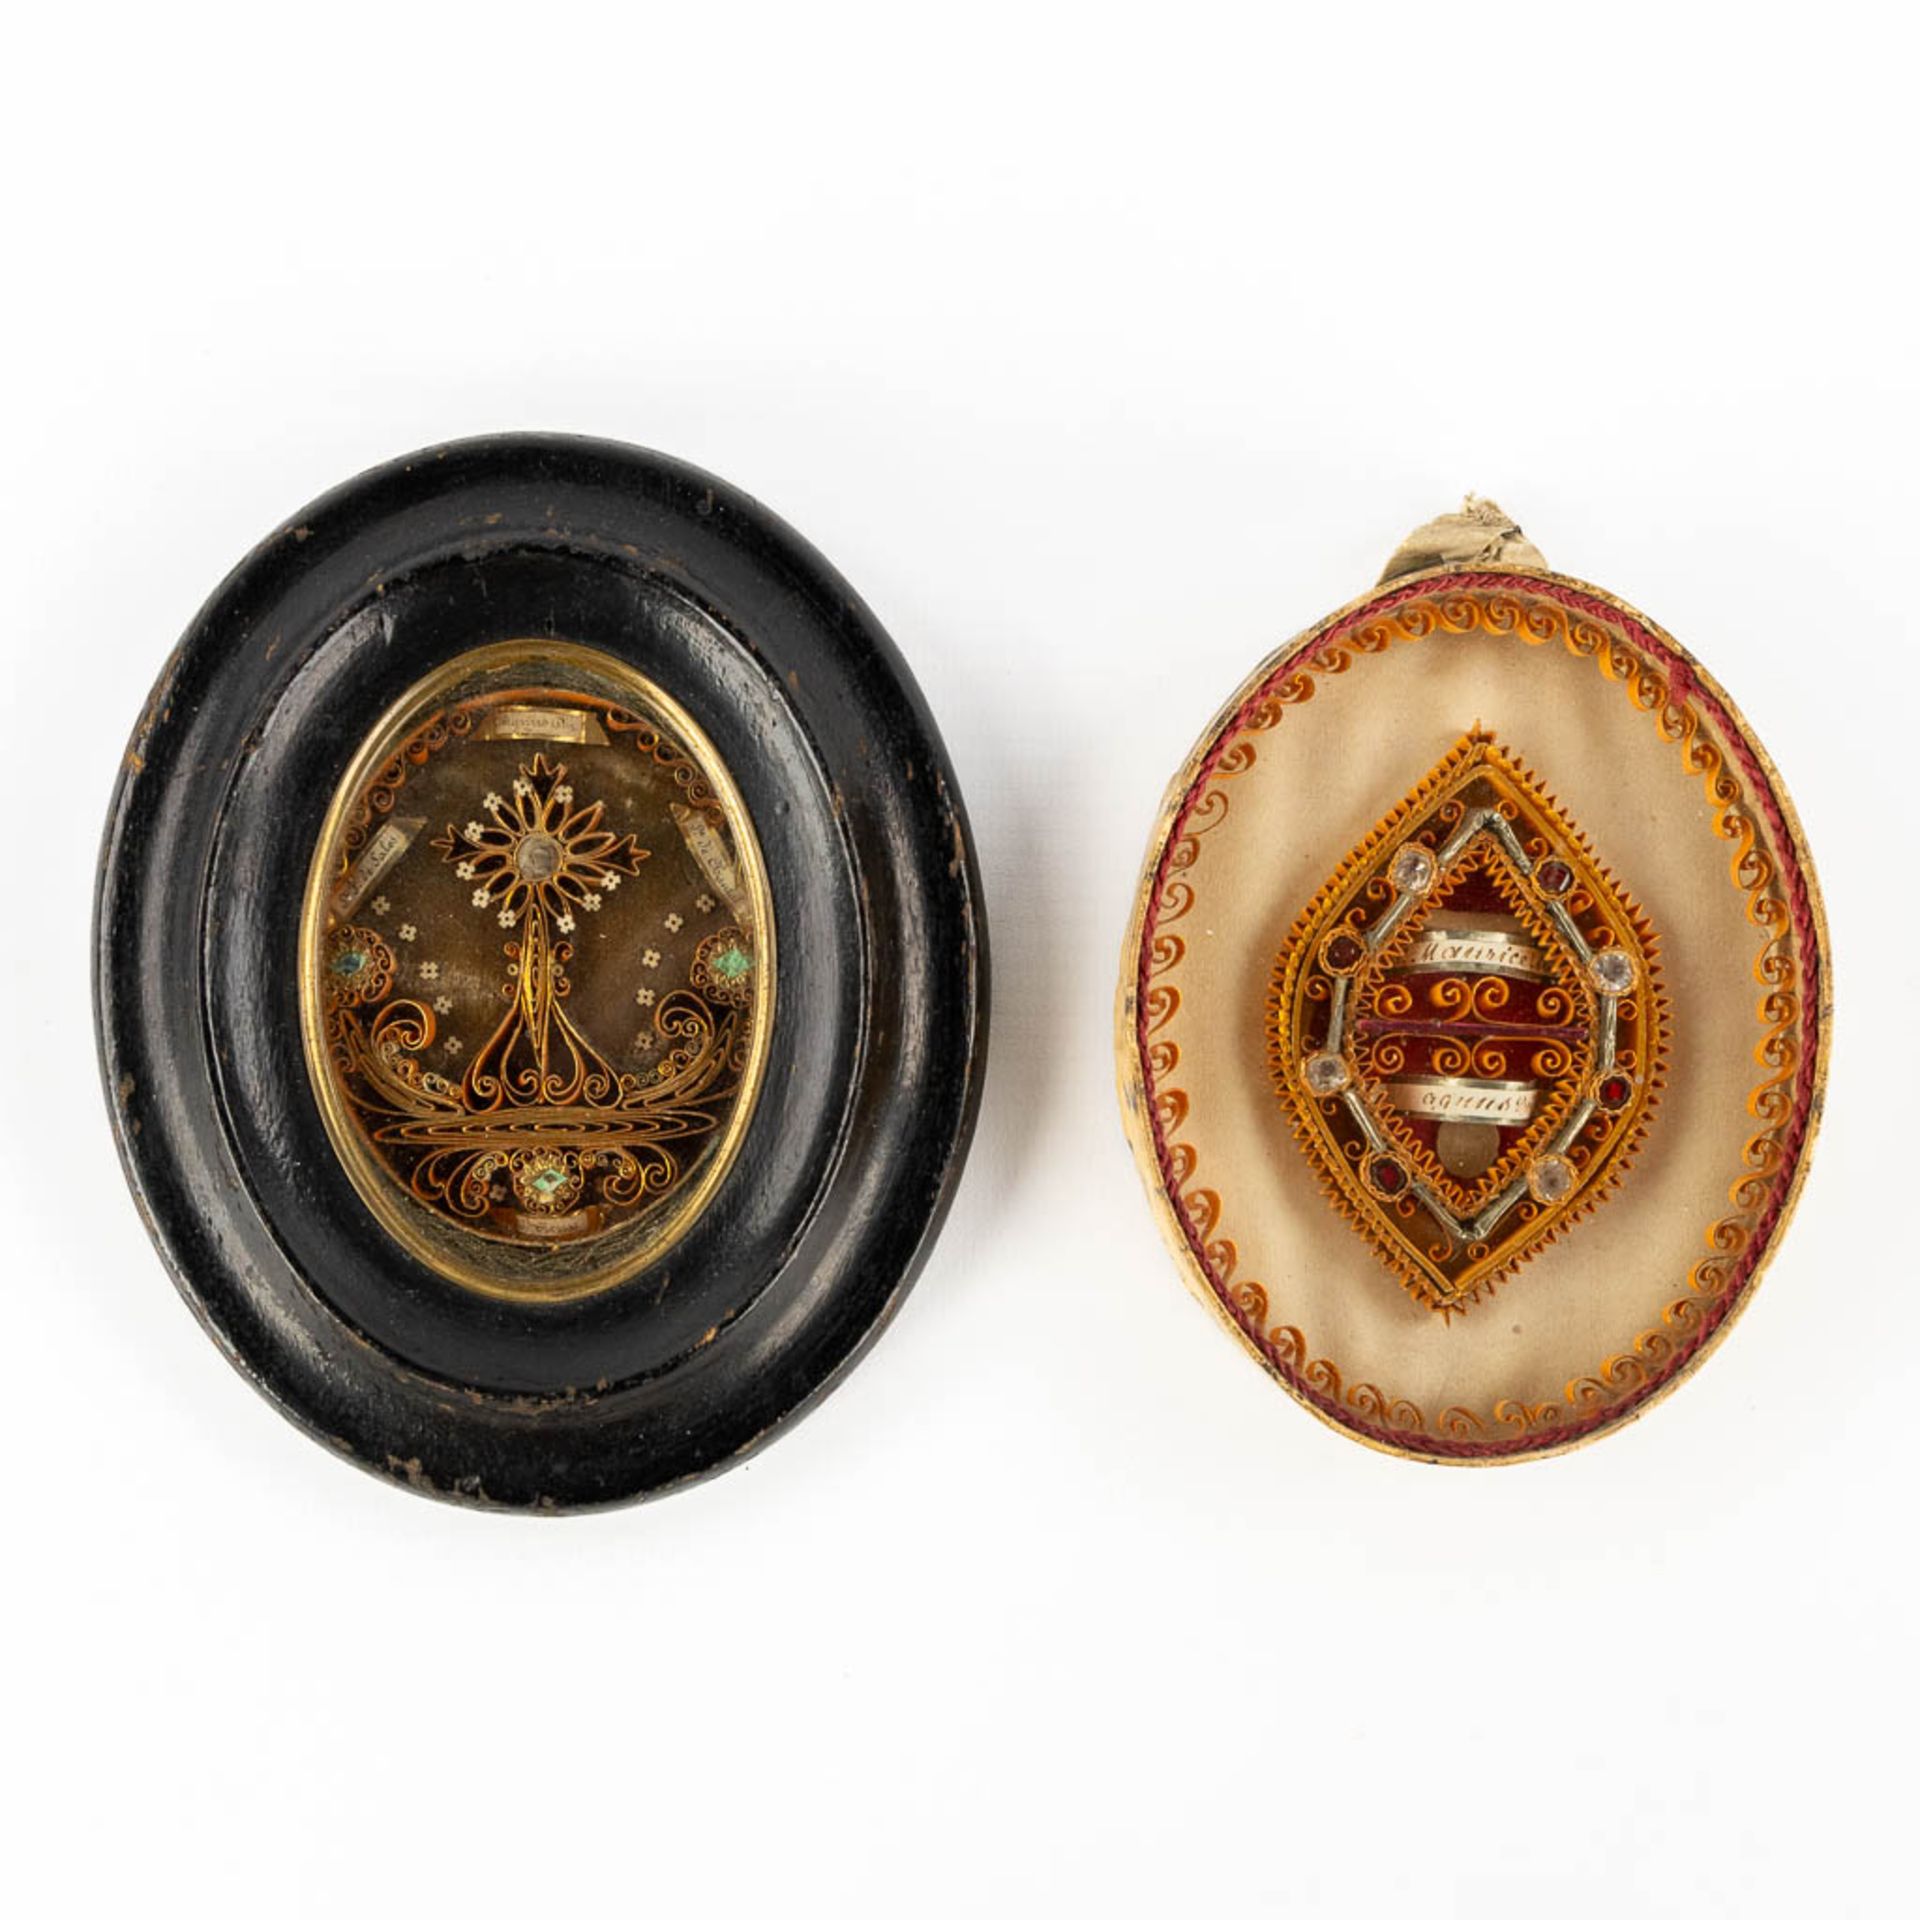 Two reliquary frames with 4 and 2 relics/Agnus Dei, framed in an oval frame. (W:12 x H:15 cm)